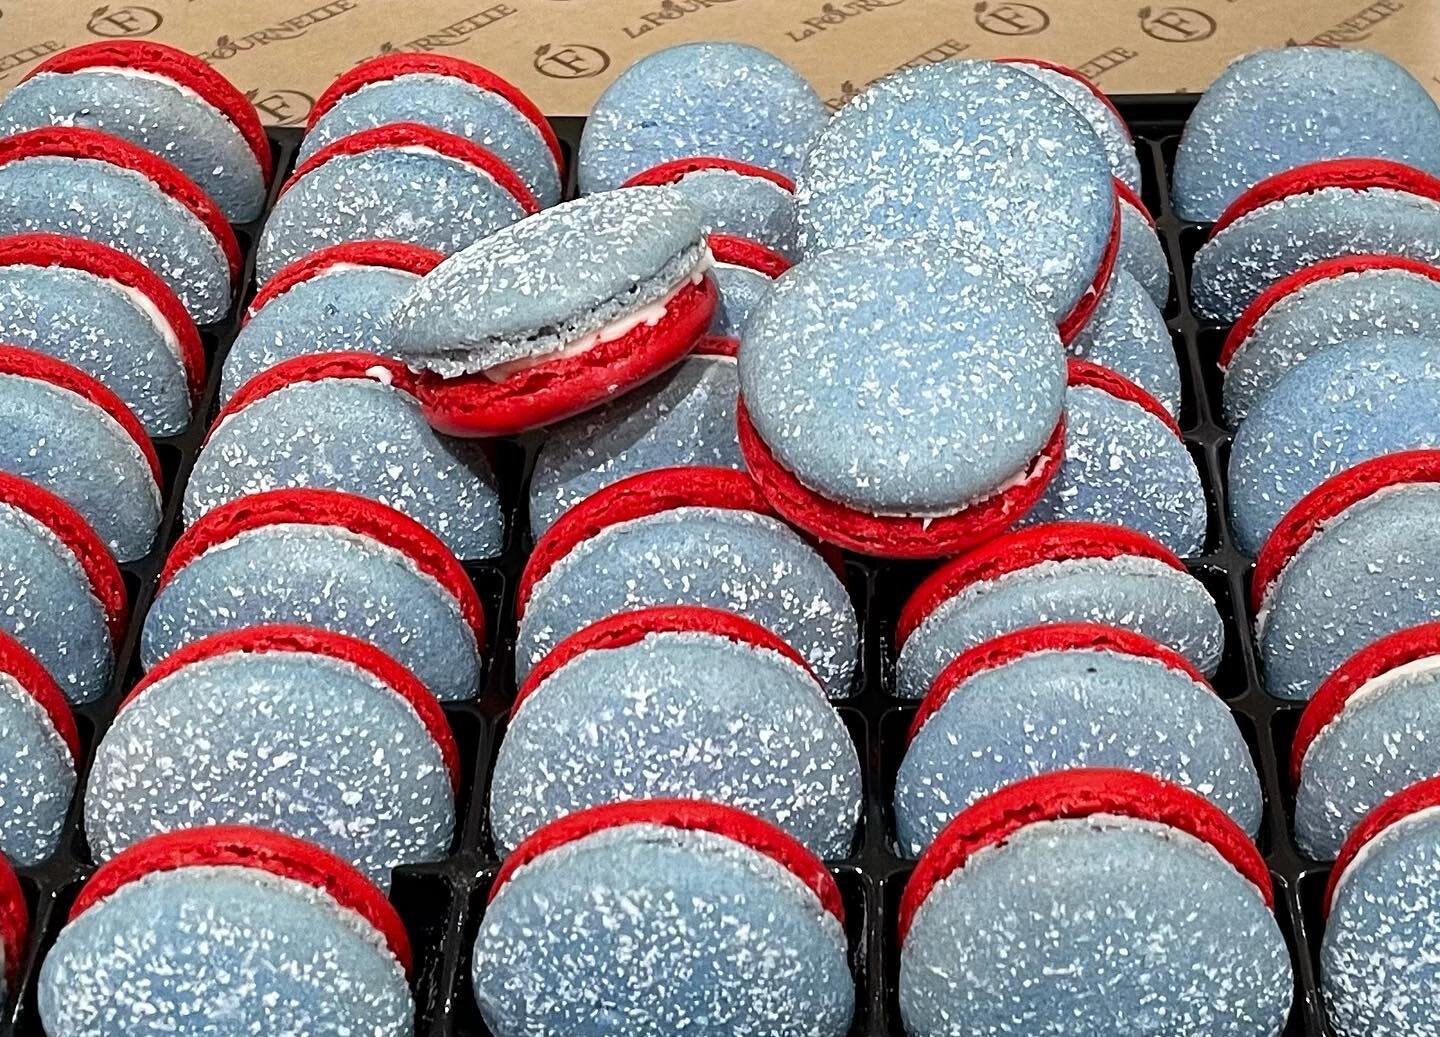 Happy Independence Day week end! 
We will be closed Sunday but are open 7-2 on Saturday and Monday.
Pictured are our celebratory macarons filled with cream cheese